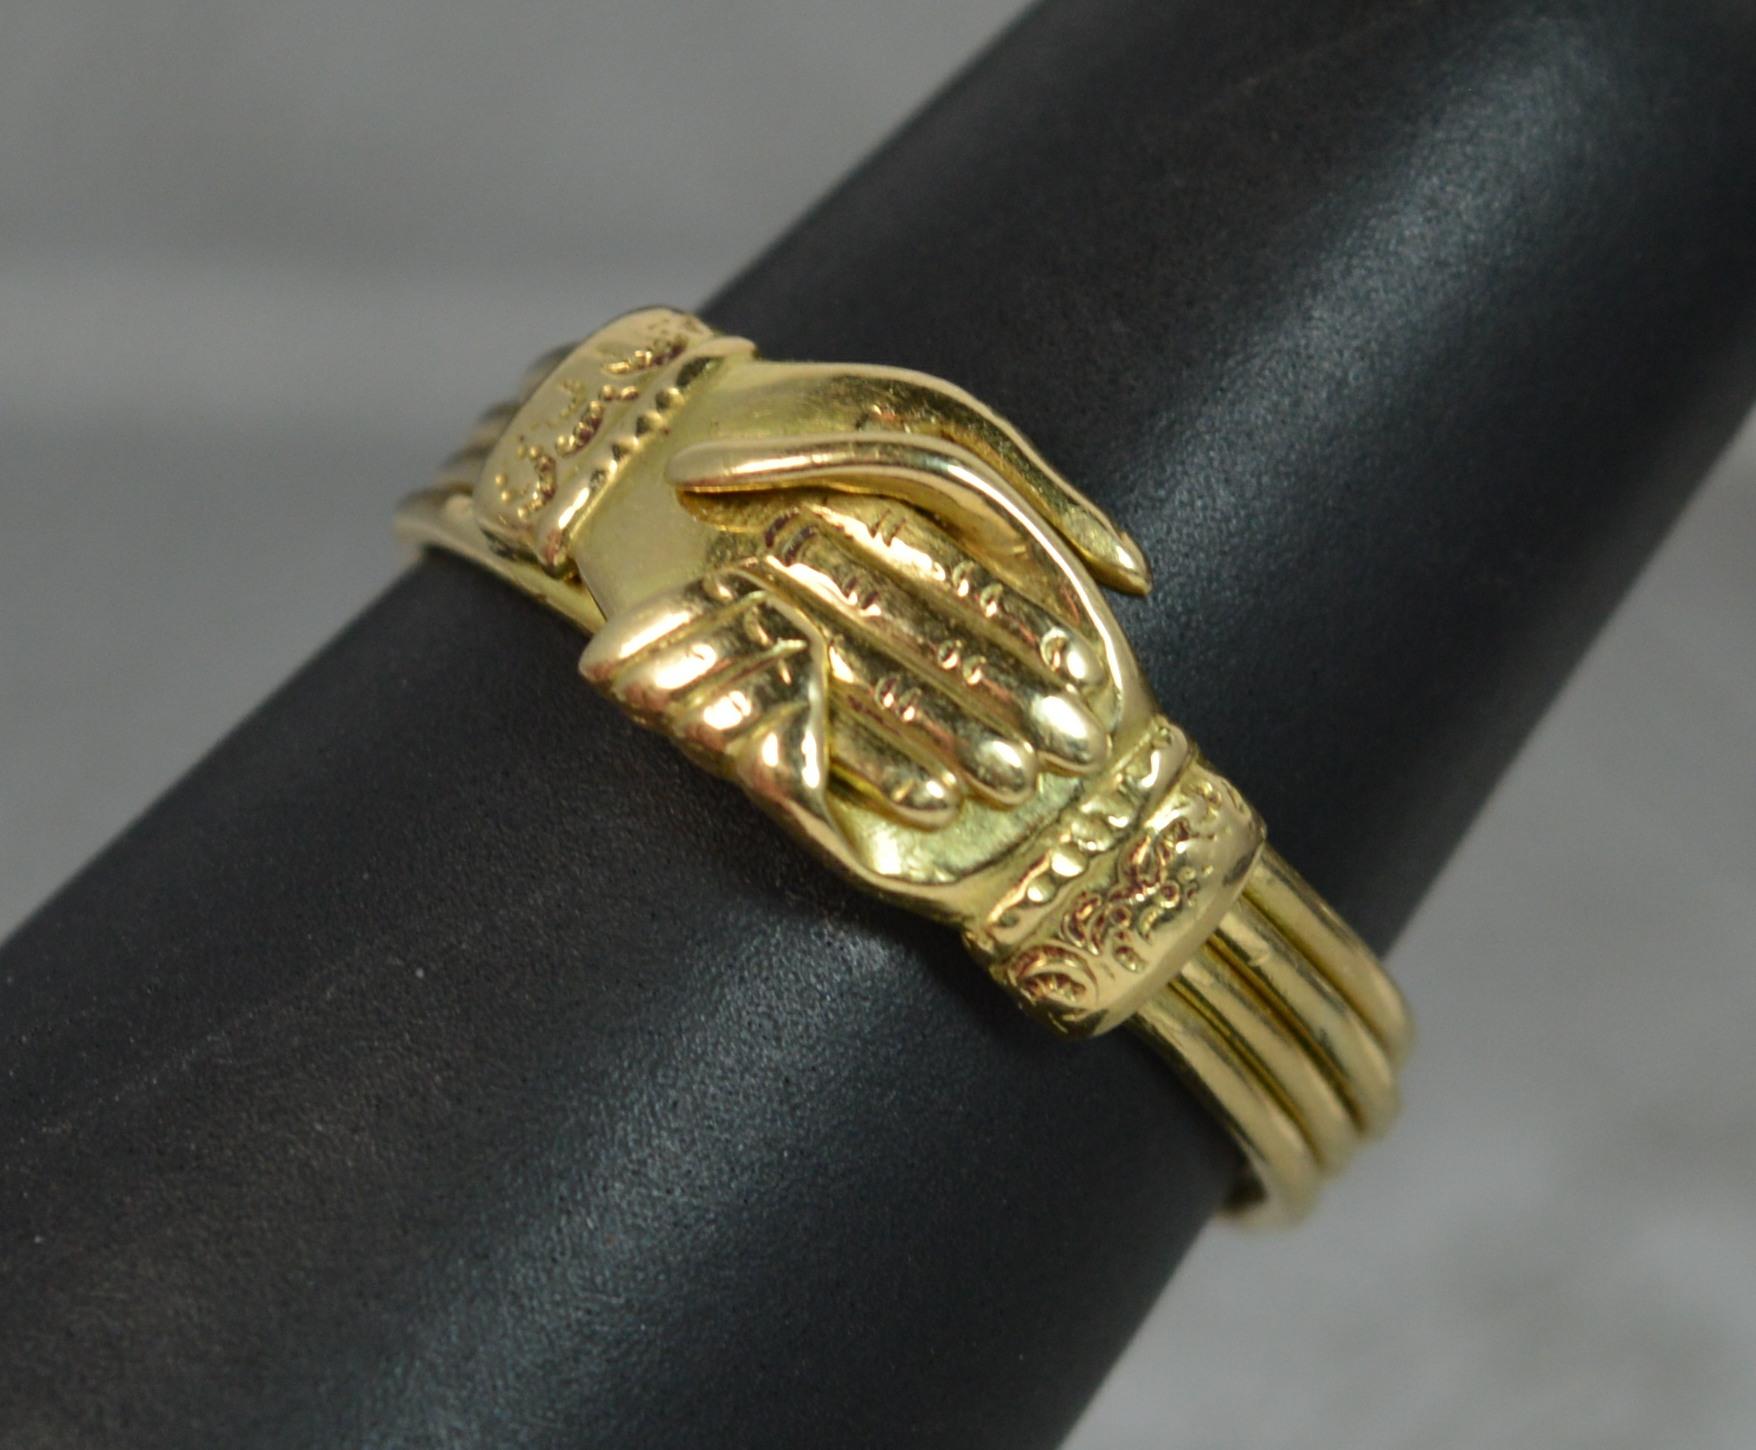 George III Georgian FEDE Handholding Faith Puzzle Ring in 18 Carat Gold